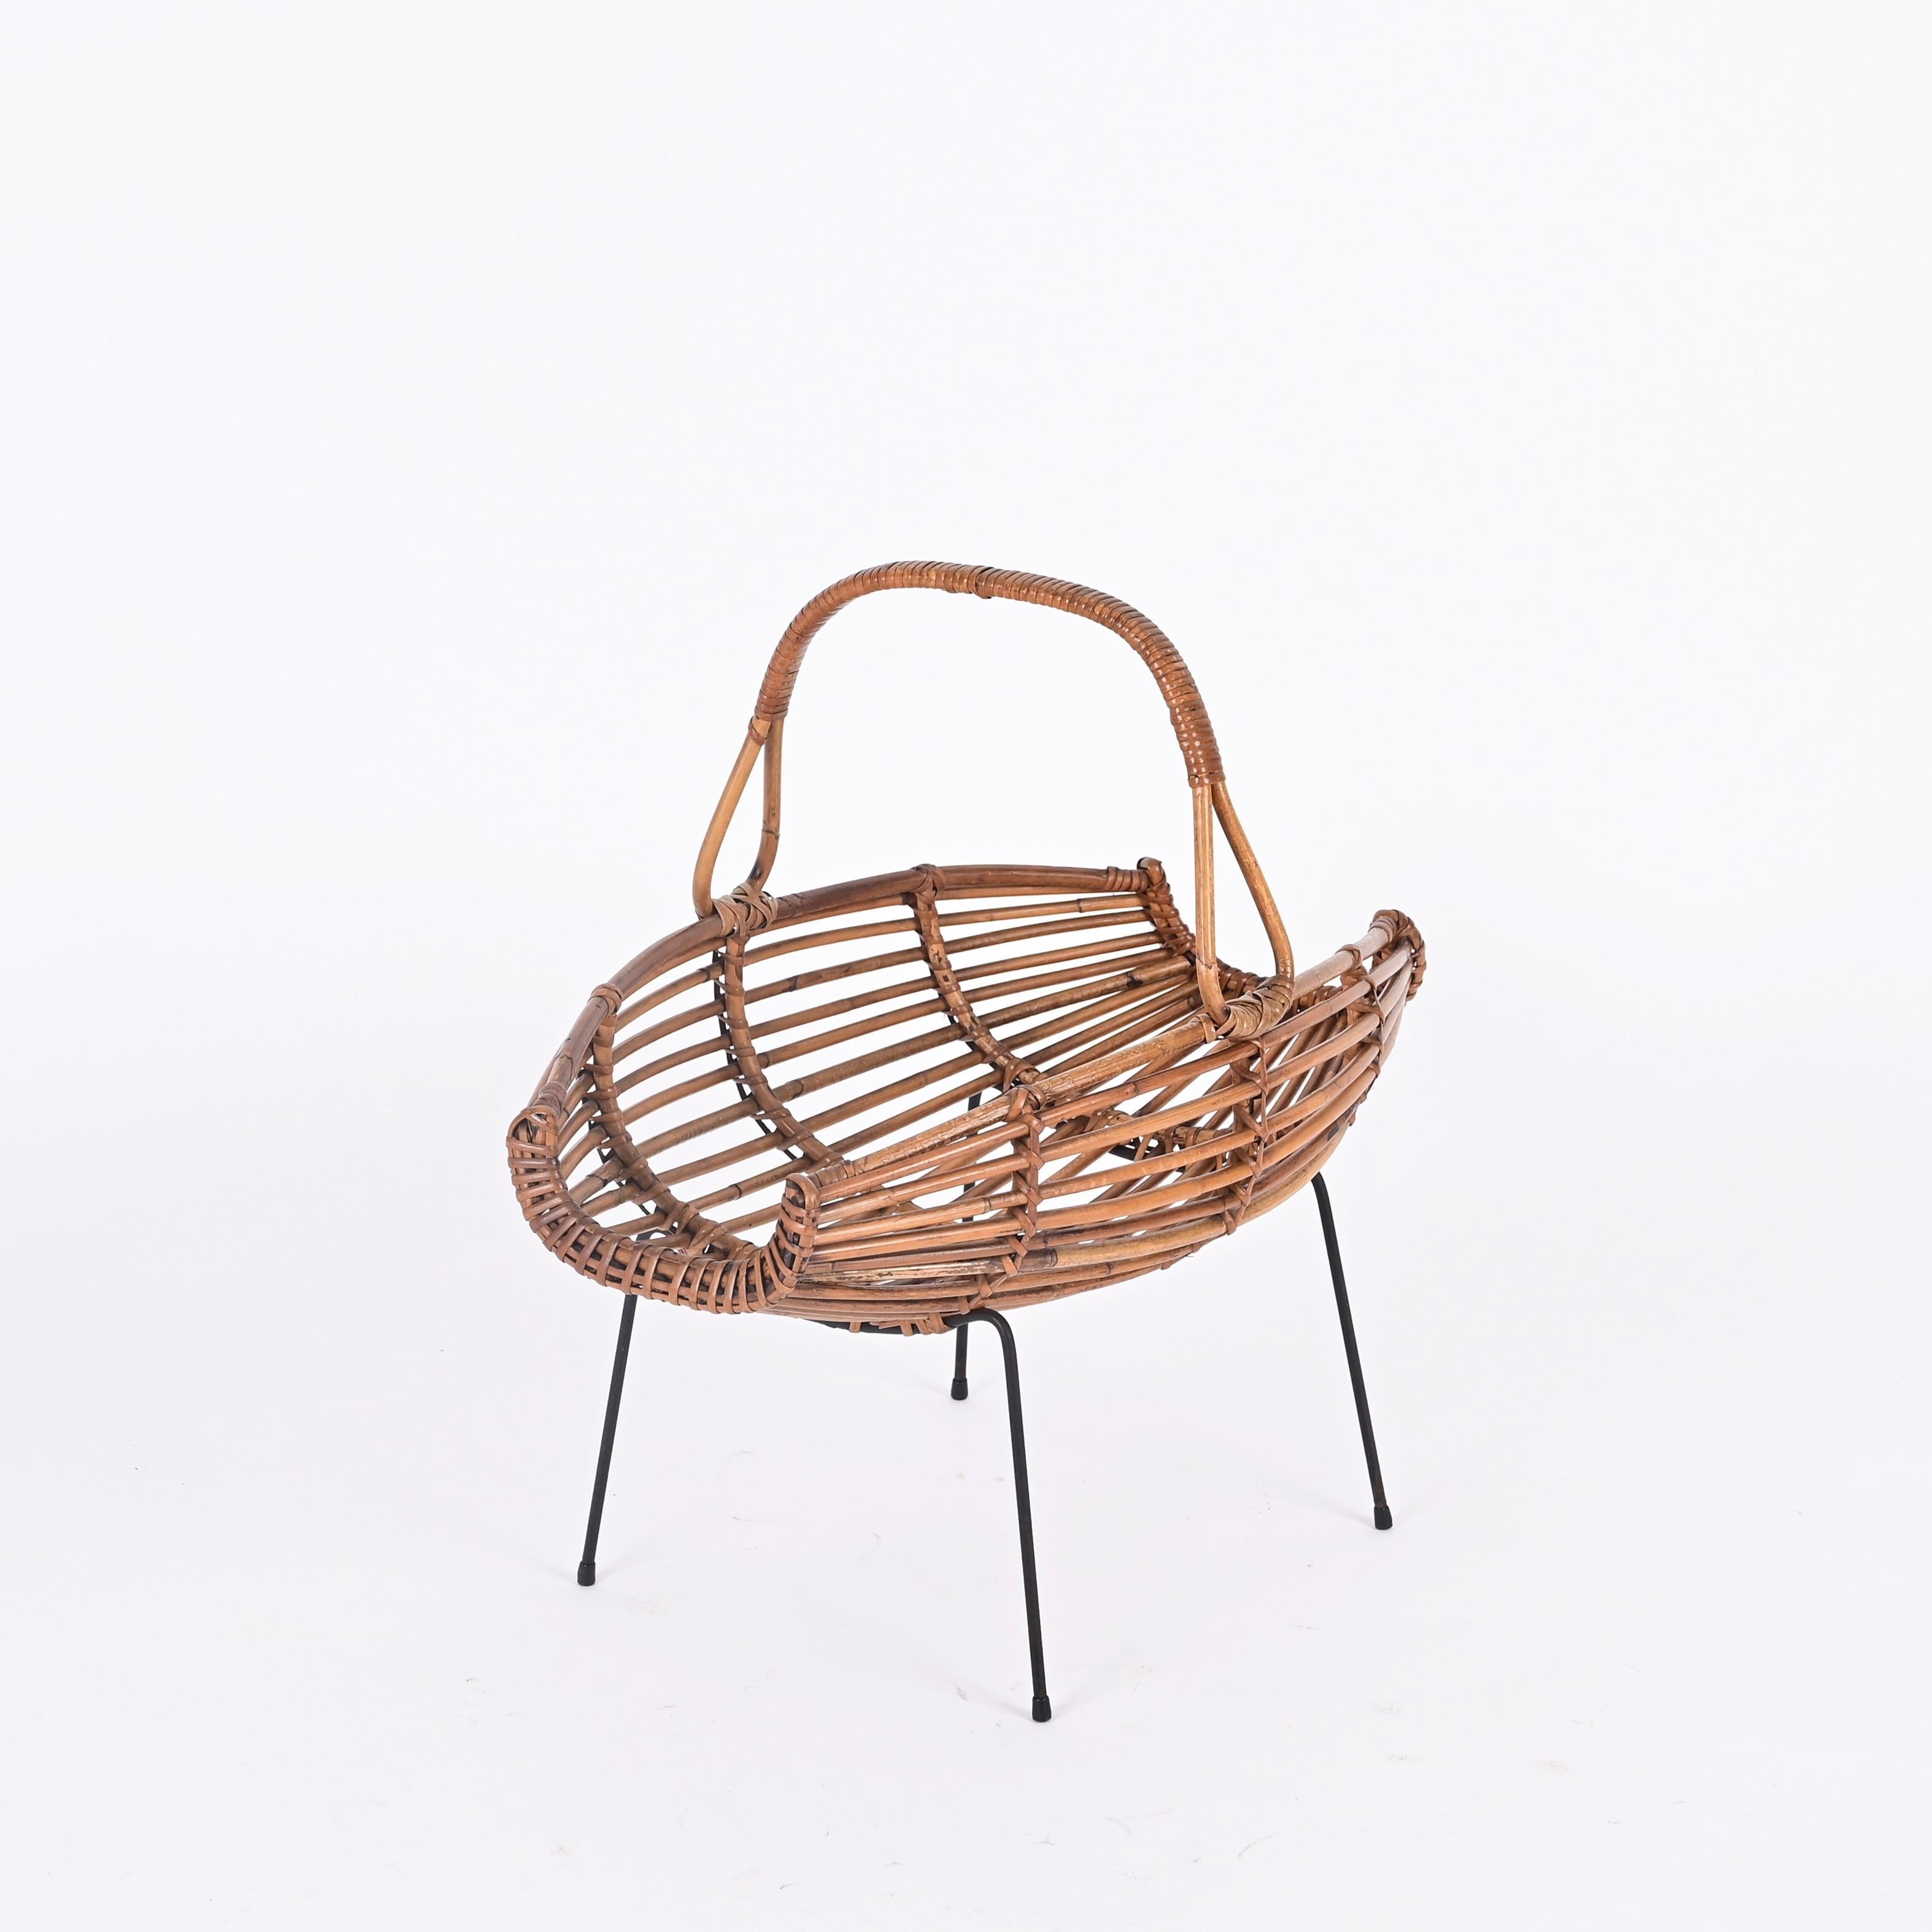 Midcentury French Riviera Rattan, Wicker and Iron Italian Magazine Rack, 1950s In Good Condition For Sale In Roma, IT